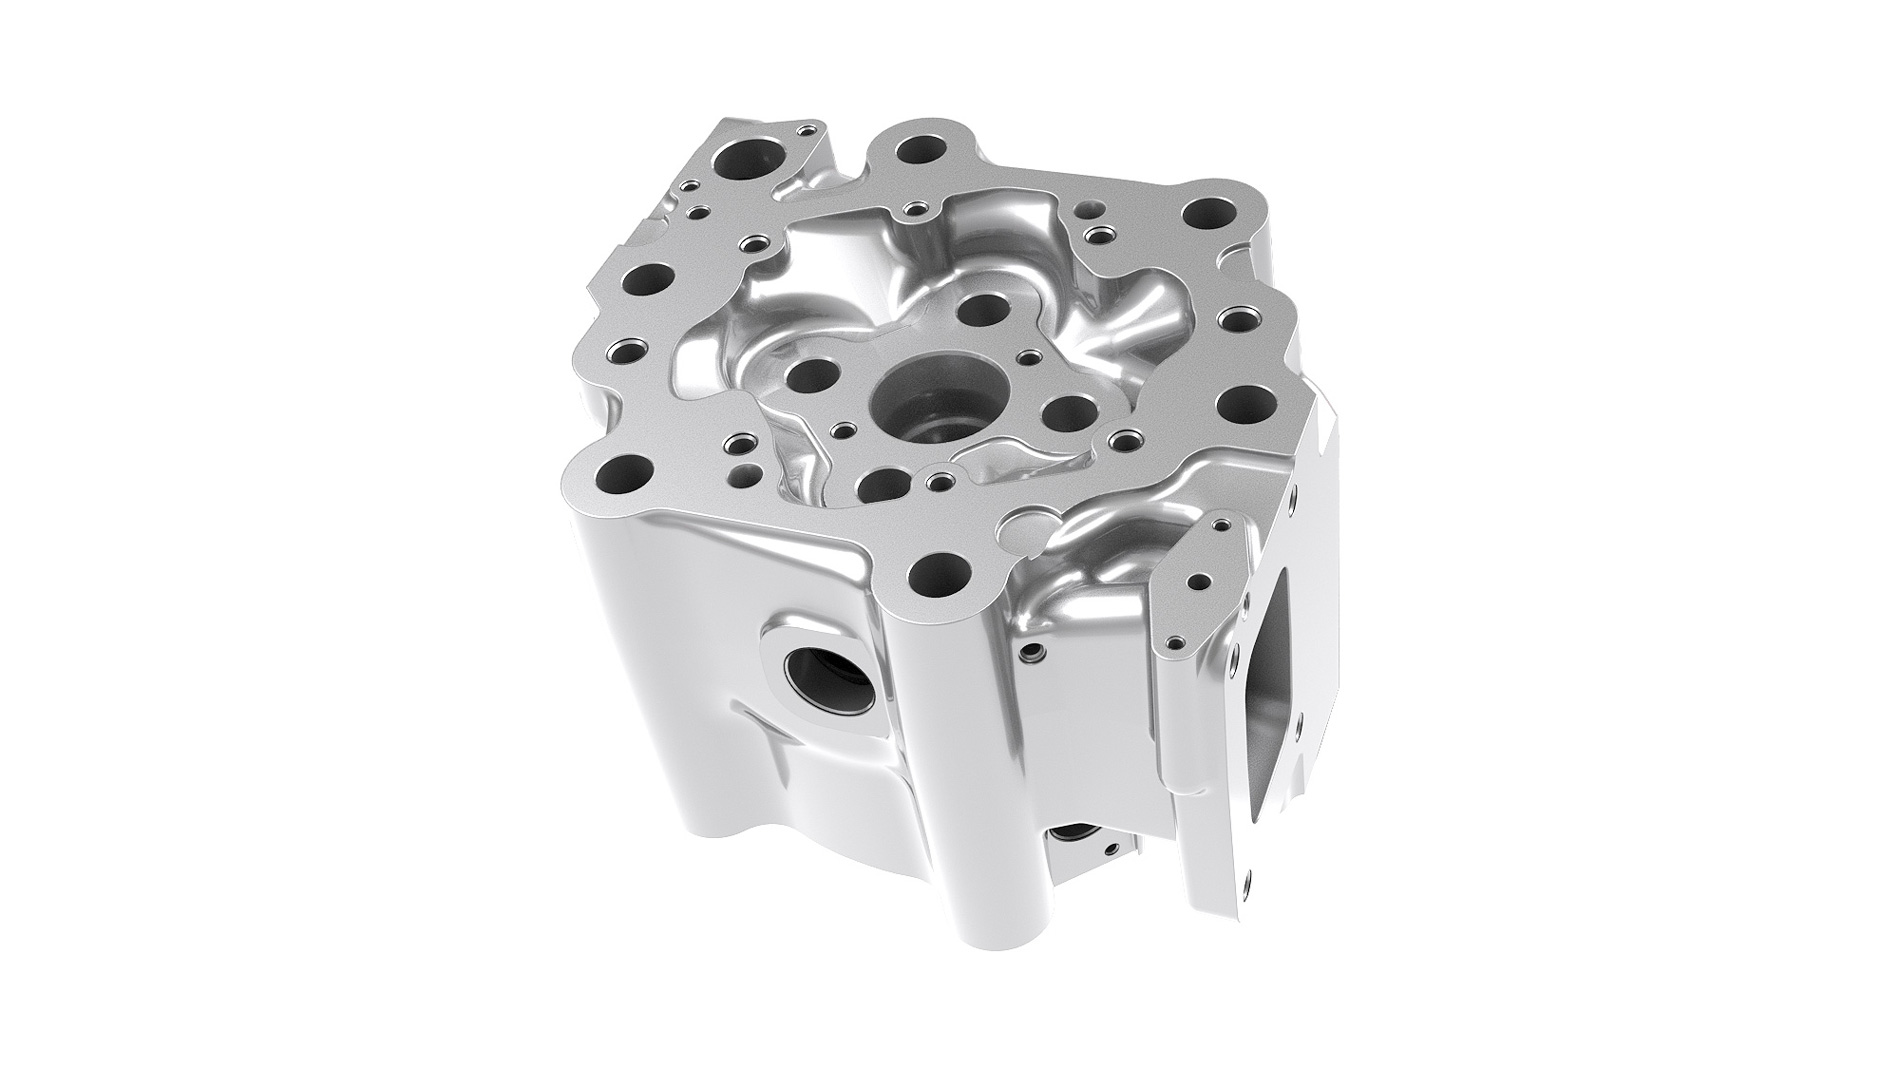 This innovative cylinder head is designed to make heavy-duty engines more efficient.